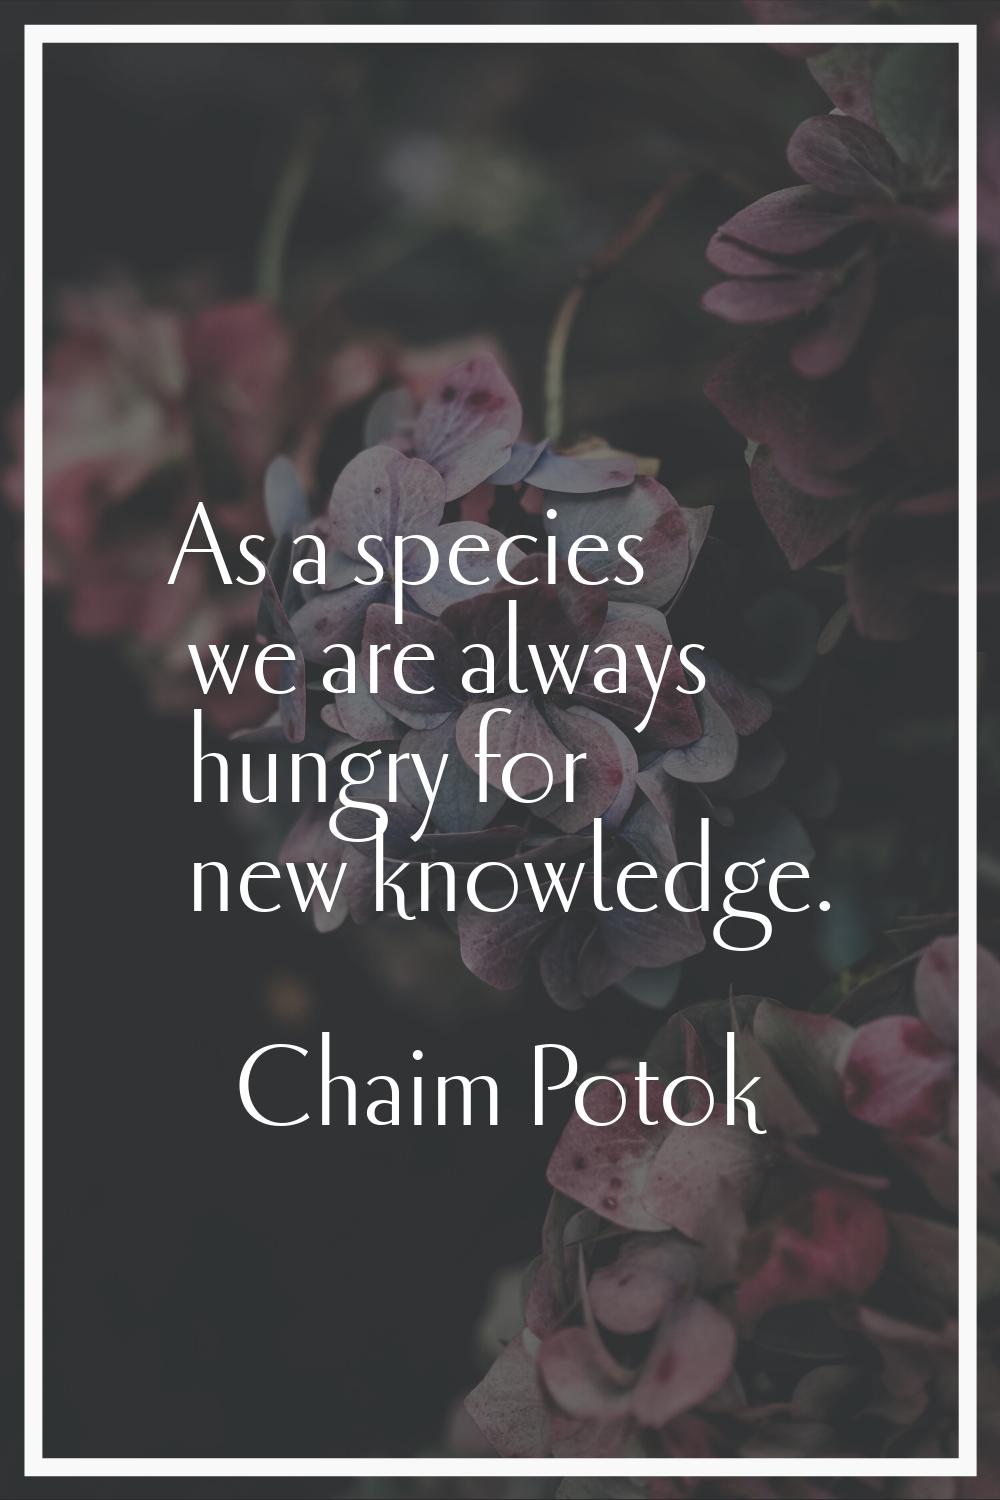 As a species we are always hungry for new knowledge.